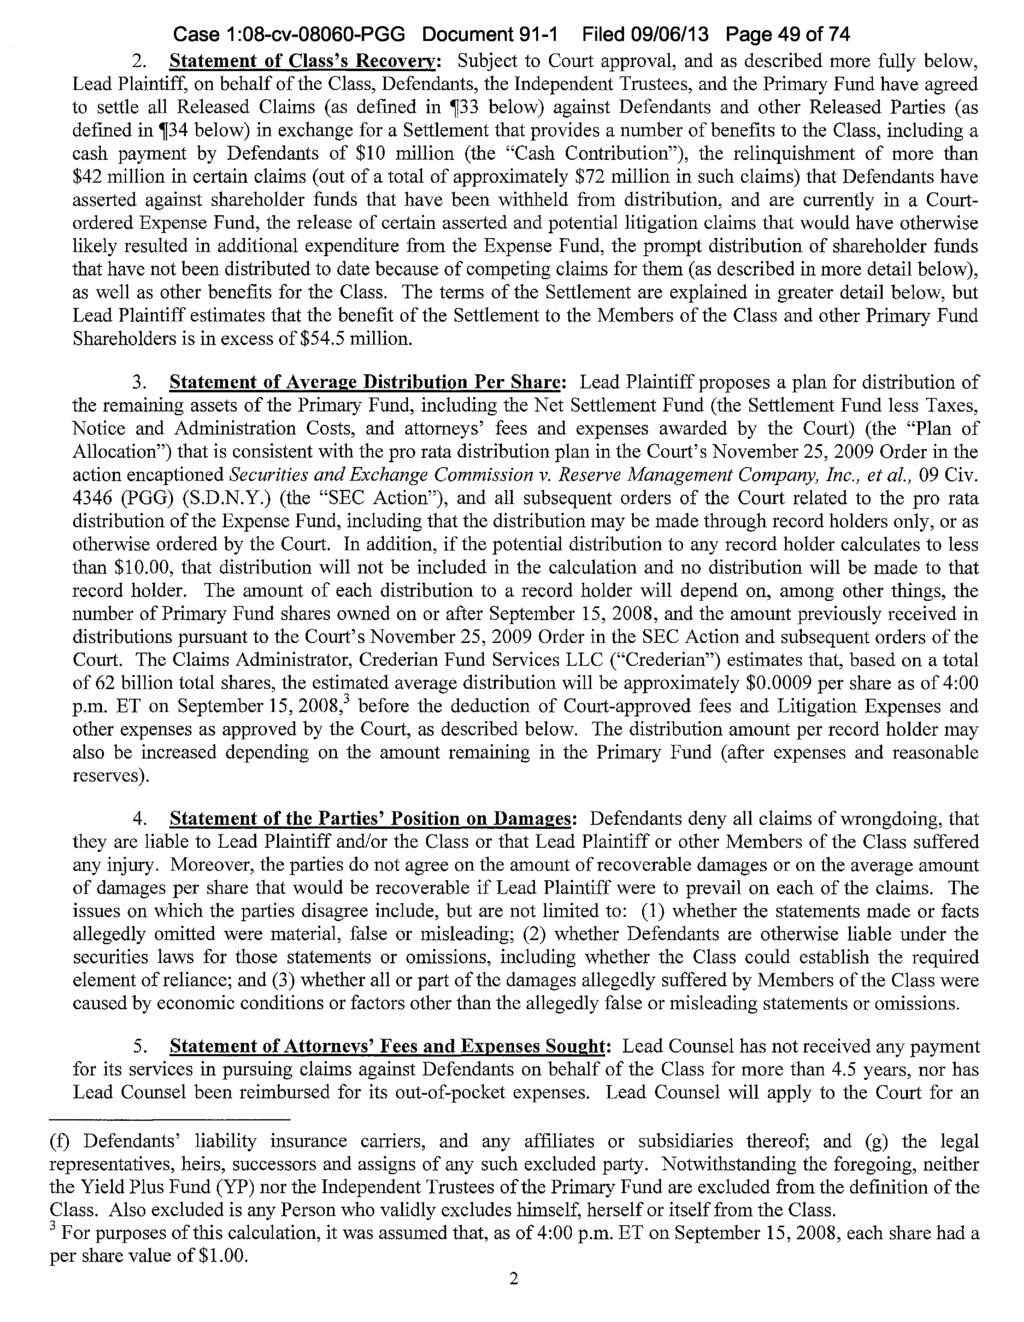 Case 1:08-cv-08060-PGG Document 91-1 Filed 09/06/13 Page 49 of 74 2.